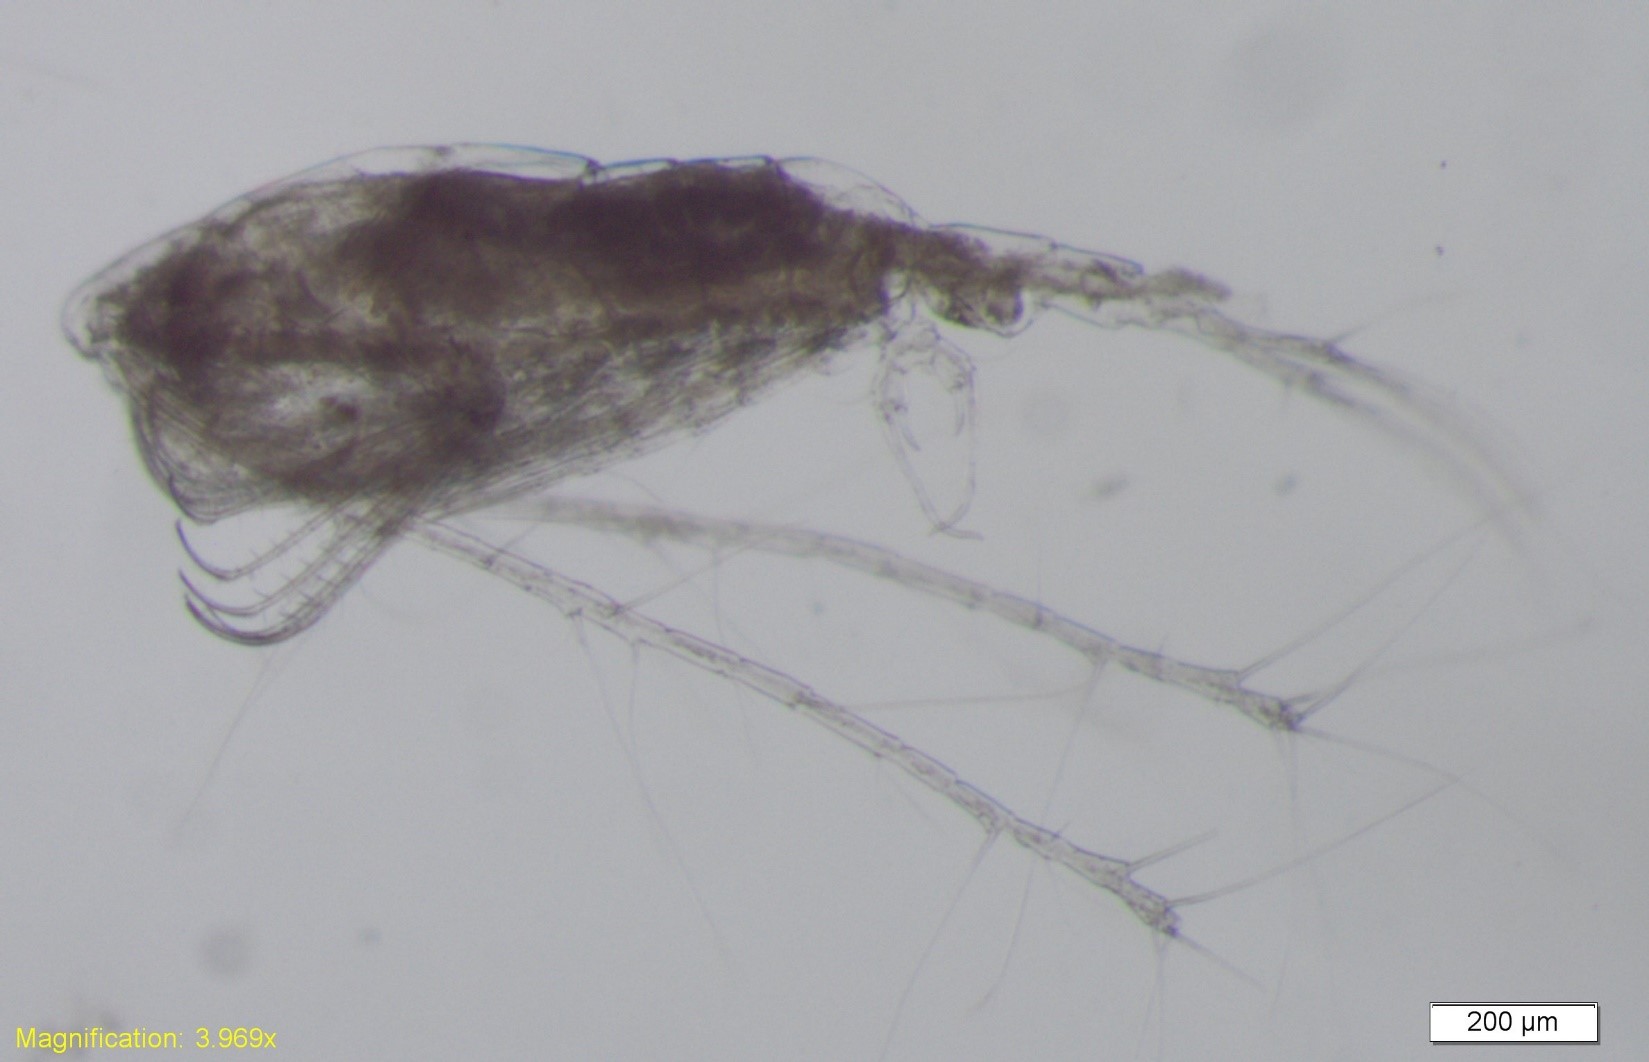 other zooplankton